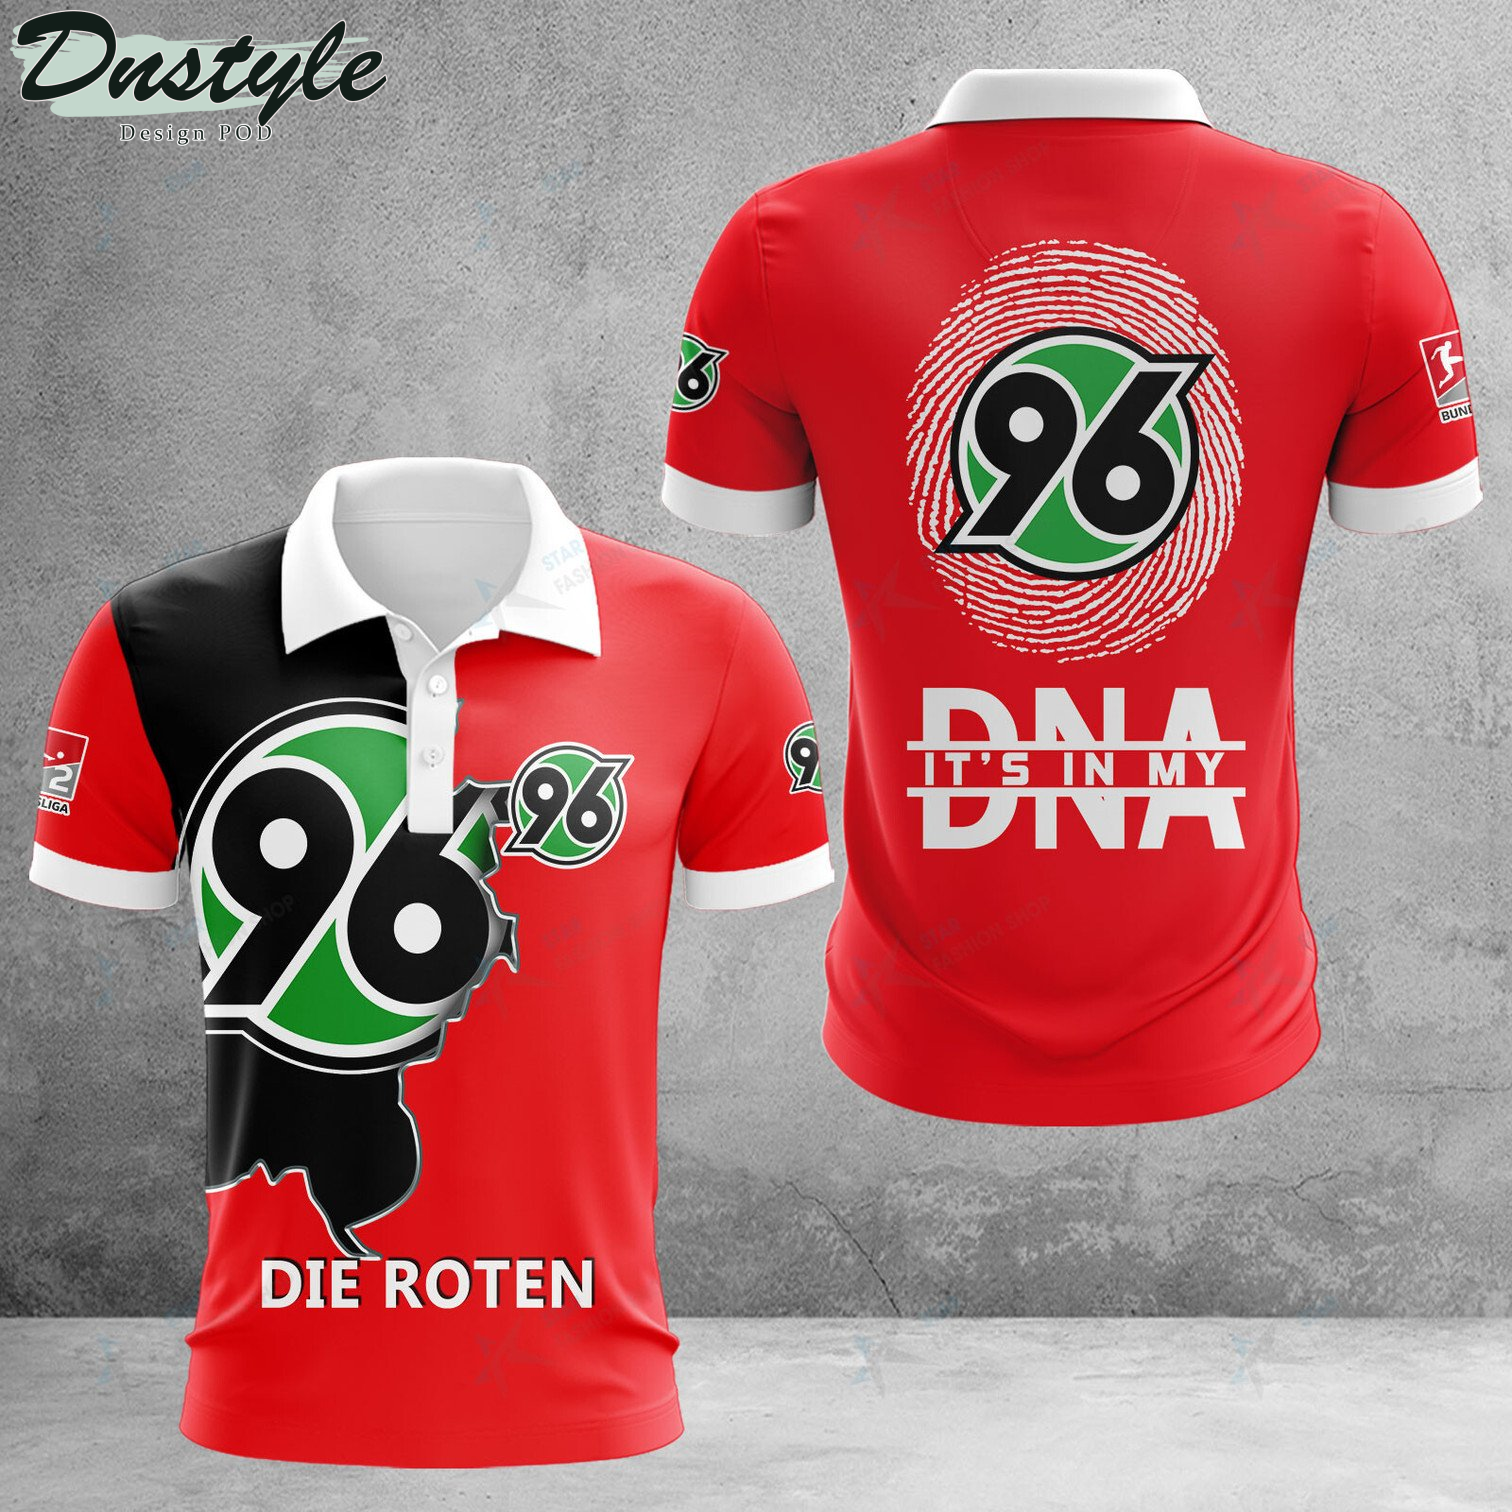 Hannover 96 it's in my DNA polo shirt